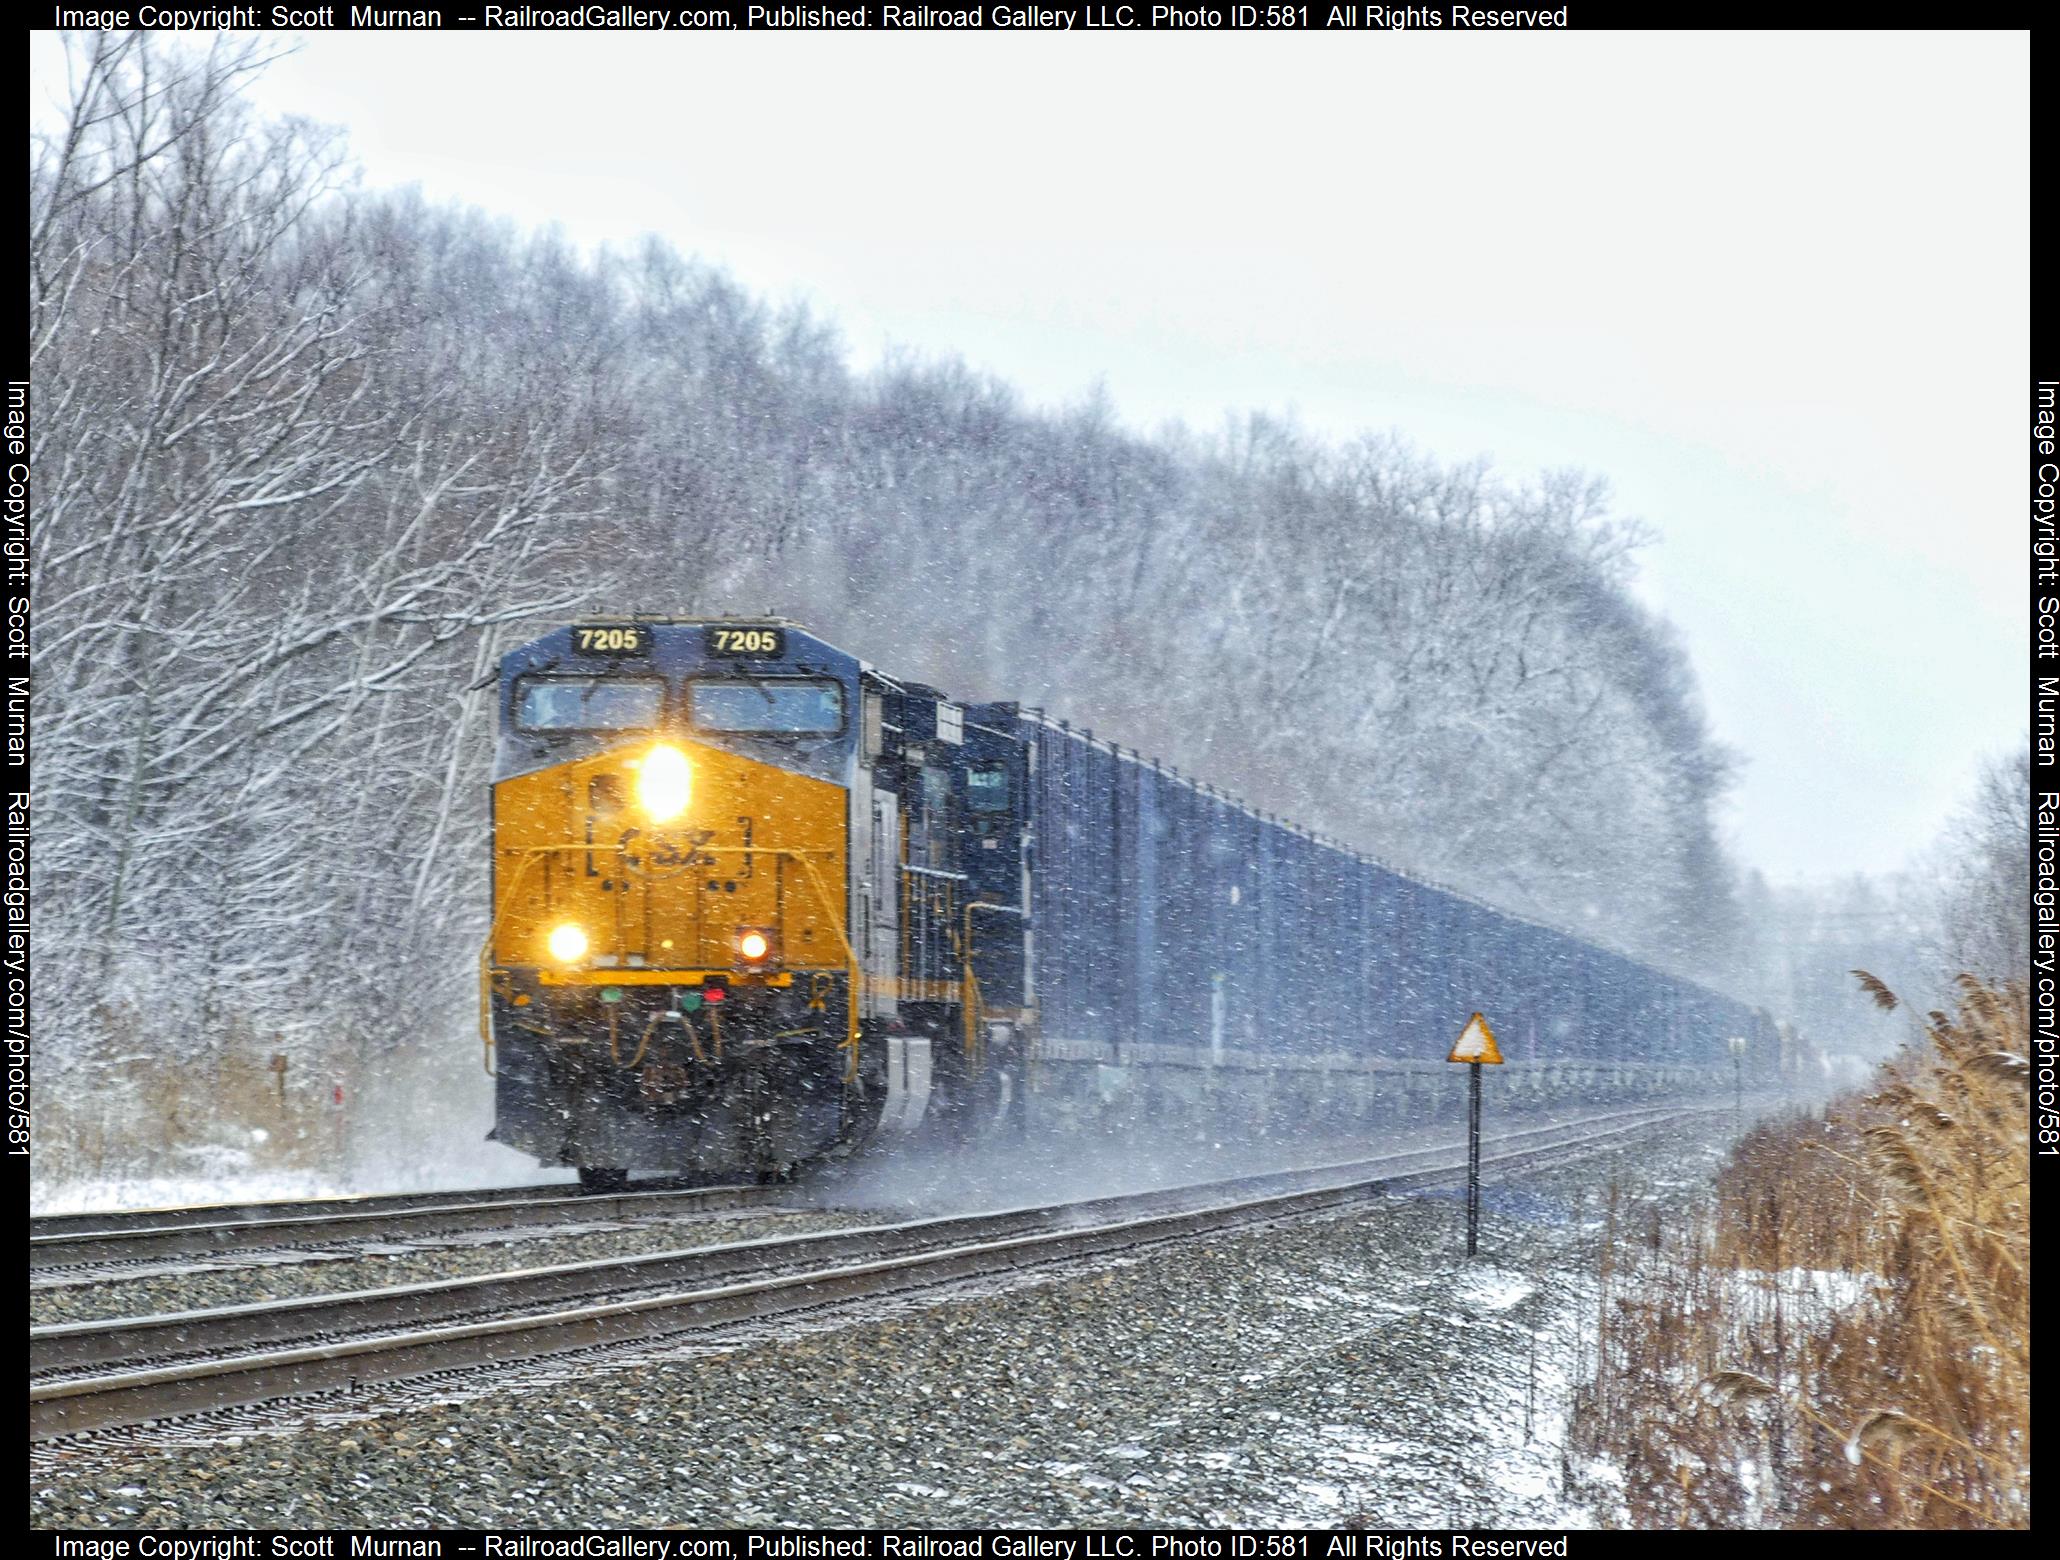 CSX 7205 is a class GE CM44AC  and  is pictured in Macedon, New York , USA .  This was taken along the Rochester  on the CSX Transportation. Photo Copyright: Scott  Murnan  uploaded to Railroad Gallery on 01/16/2023. This photograph of CSX 7205 was taken on Saturday, January 14, 2023. All Rights Reserved. 